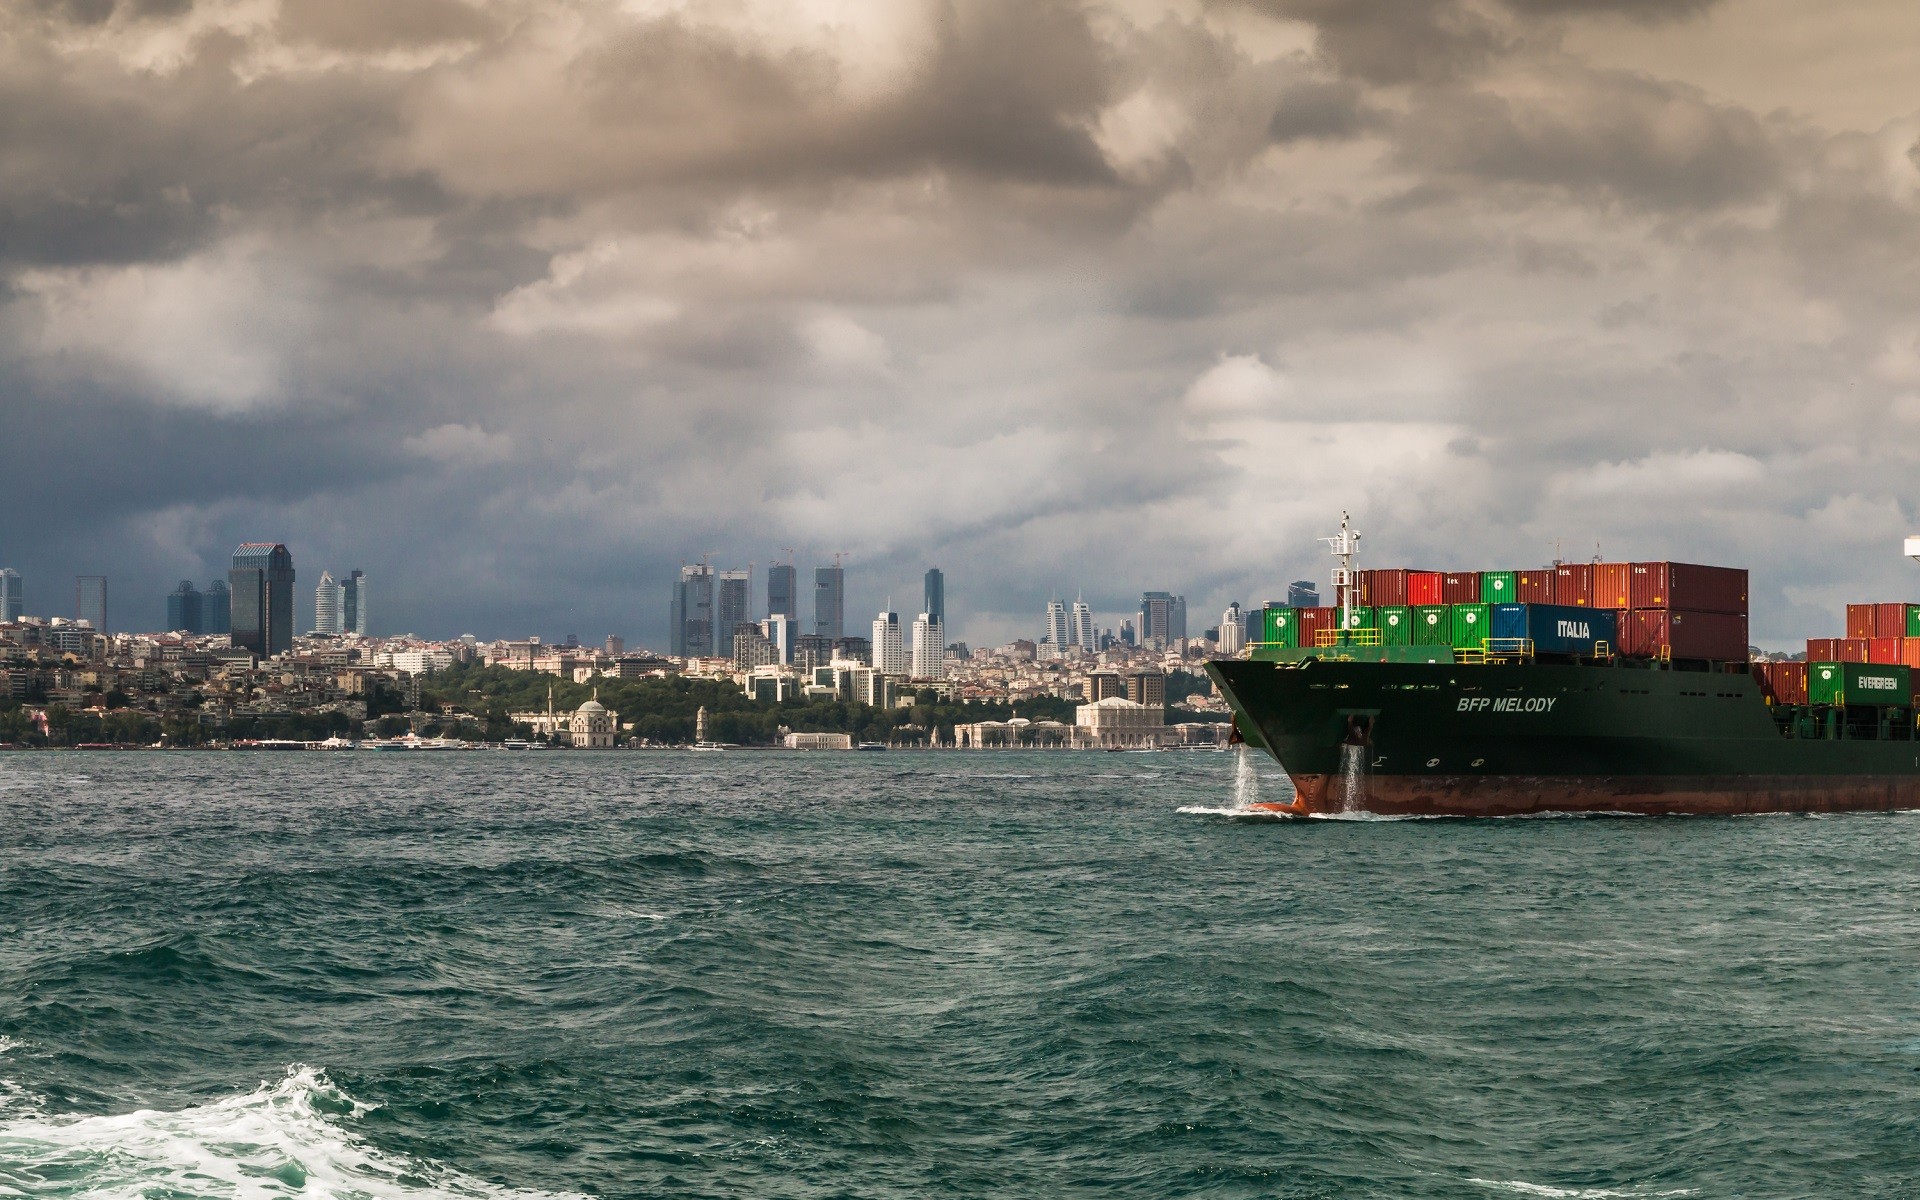 Turkey Istanbul City Cityscape Ship Container Ship Sea Clouds Waves Overcast Merchant Ship 1920x1200